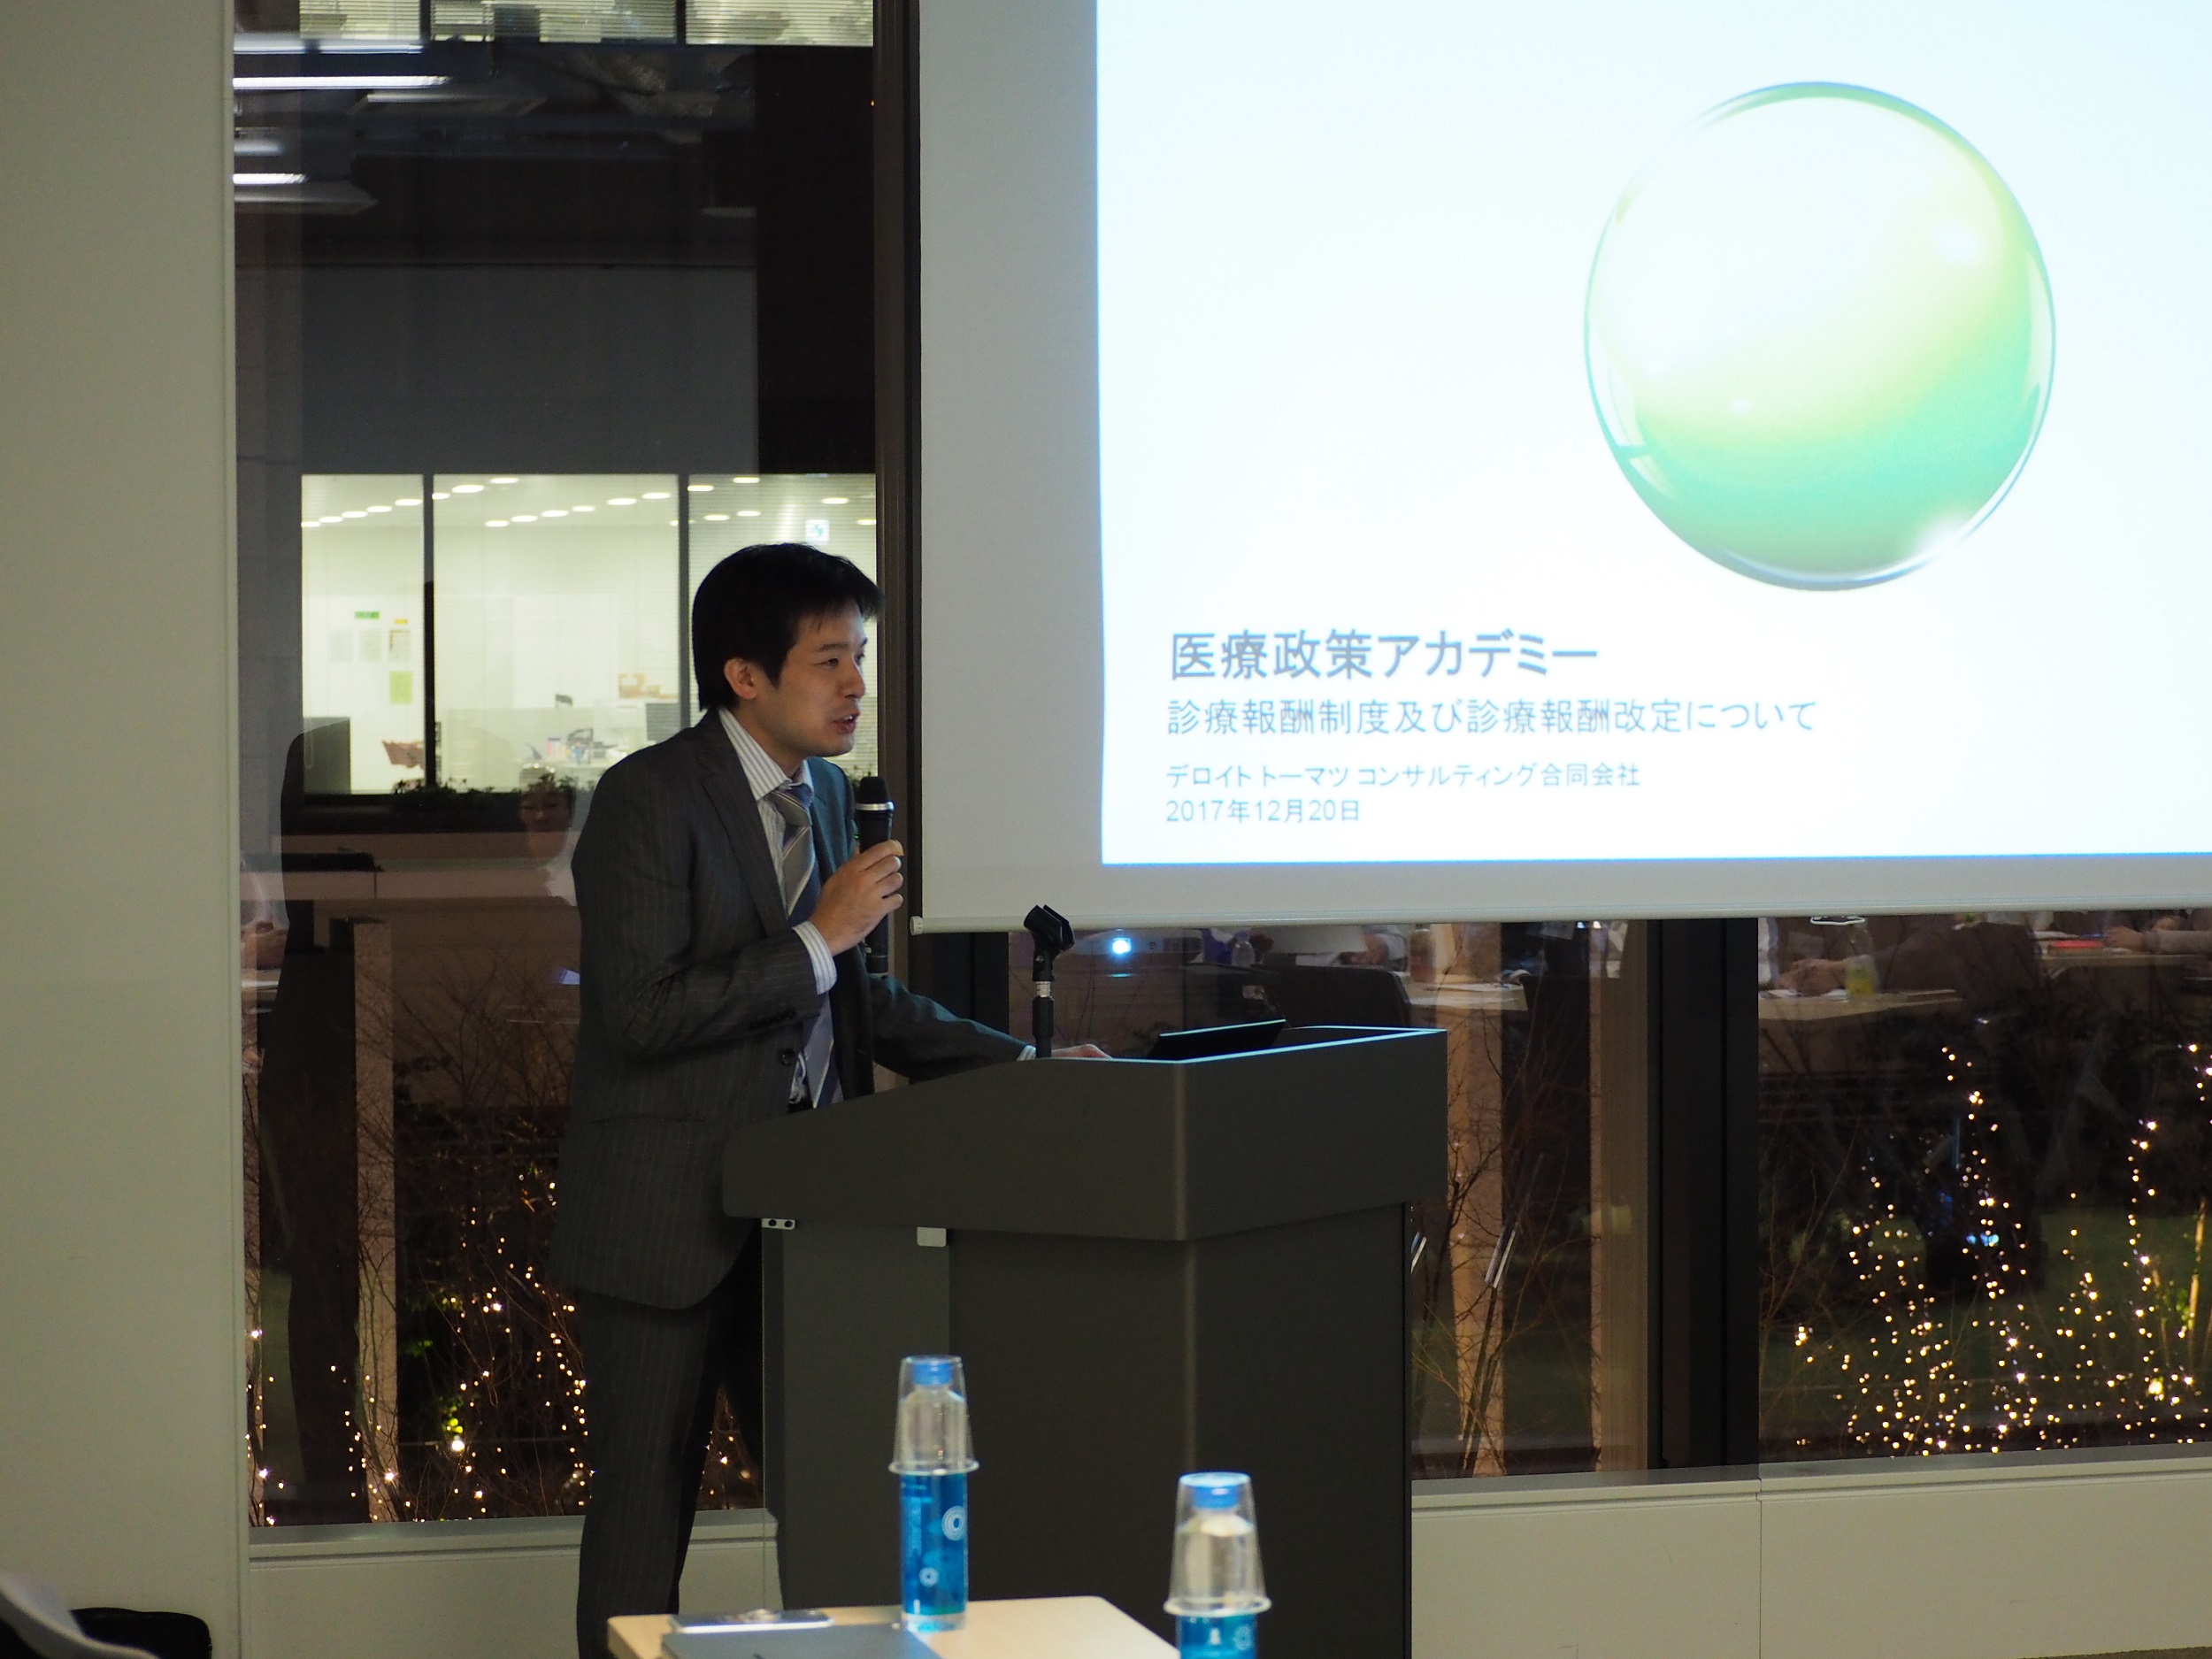 [Event Report] Health Policy Academy, Health Policy 101: Session 3 “The Health Policy Decision-making Process” (Lecture by Dr. Masato Honma)